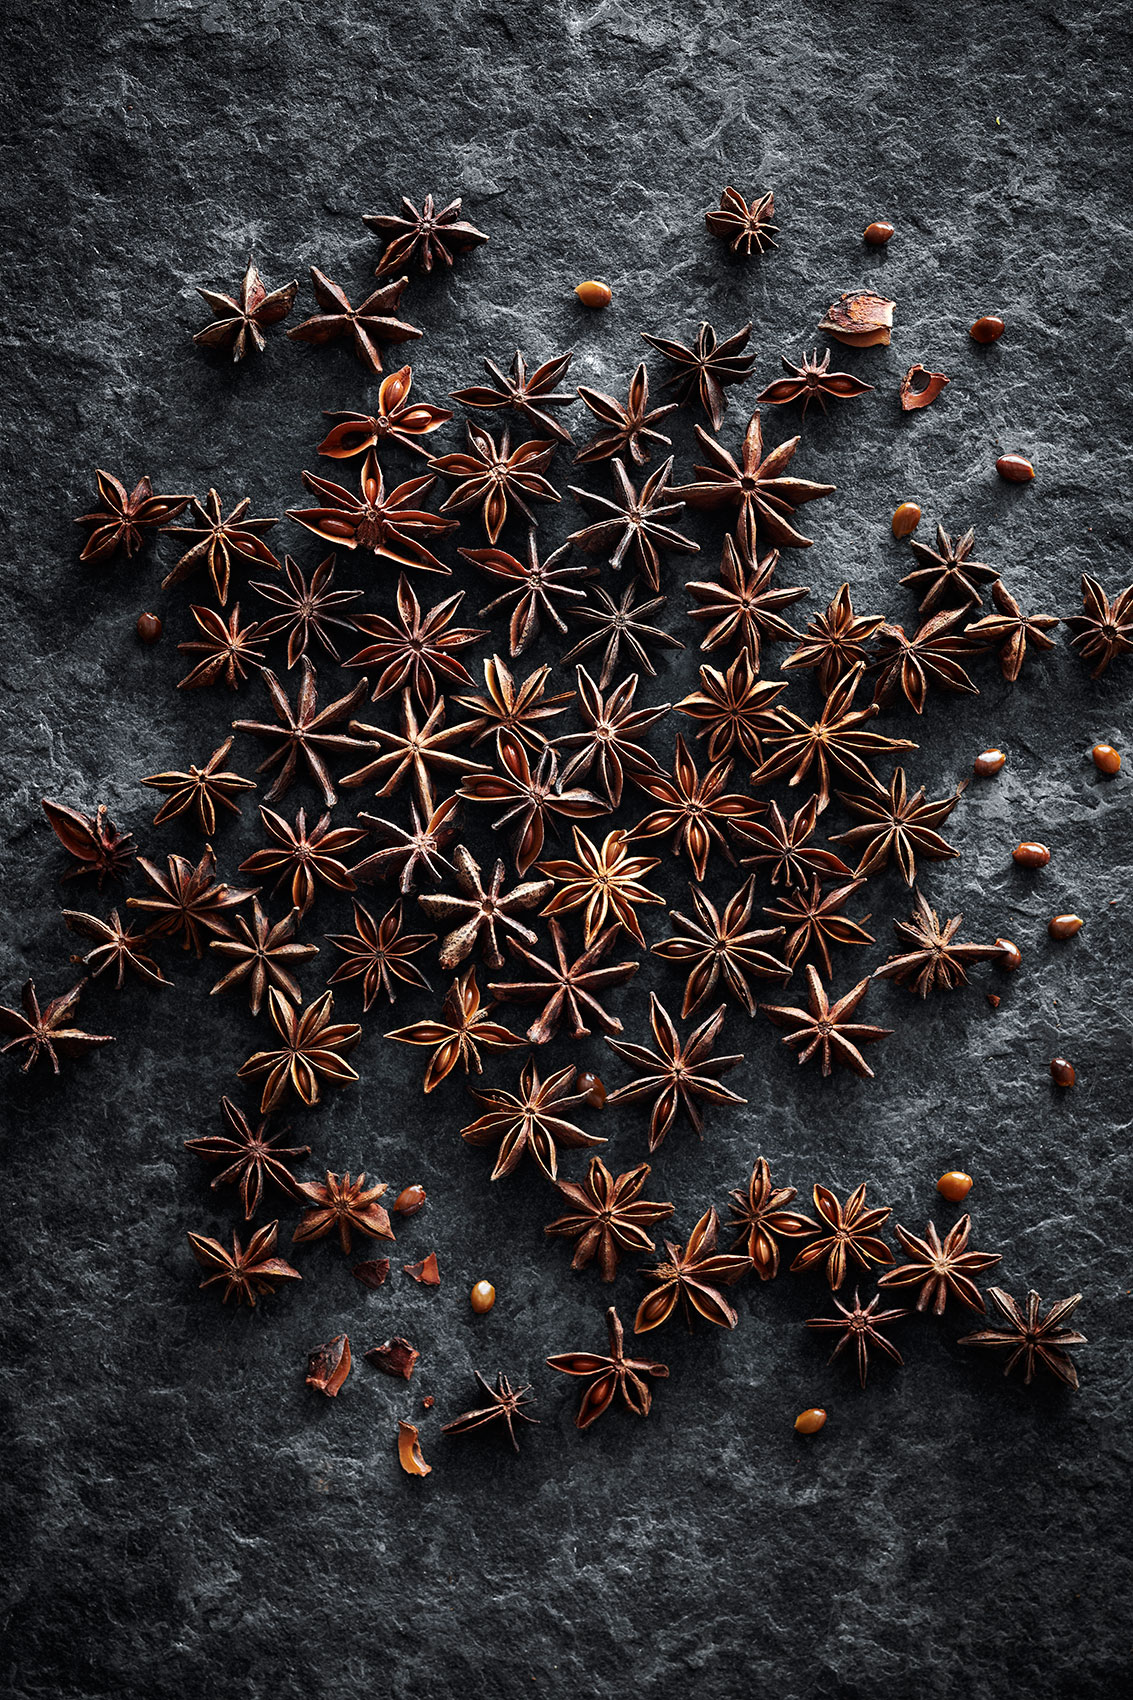 Spice Health Heroes • Whole Dried Star Anise Pods on Dark Textured Counter • Cookbook & Editorial Food Photography